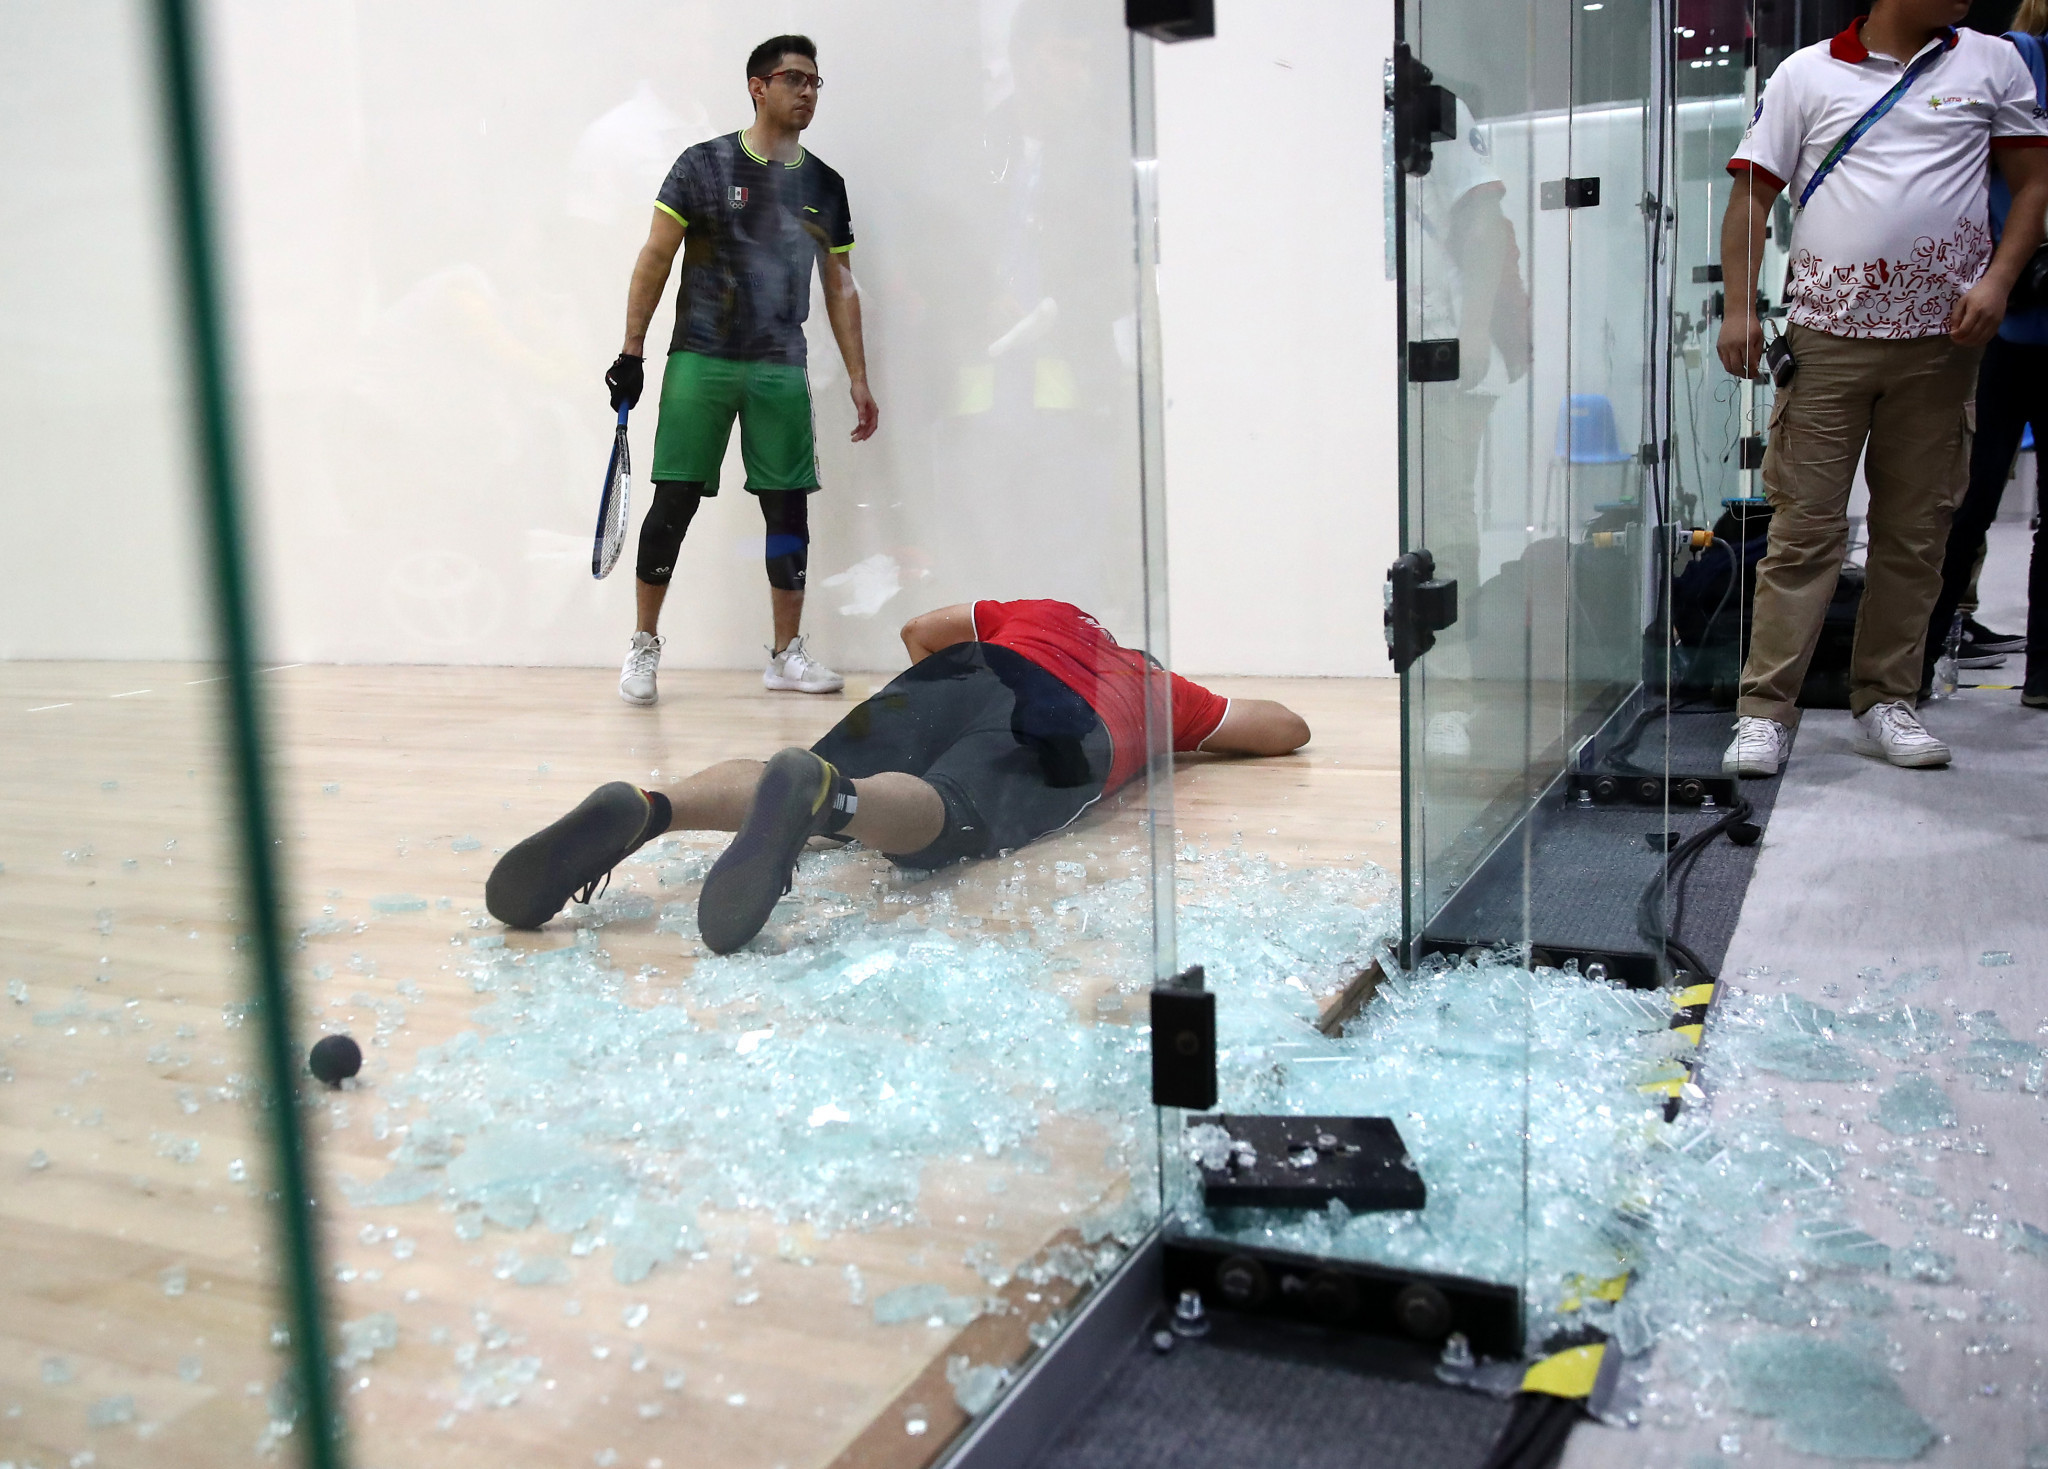 Mexico's Alvaro Beltran crashed through the racquetball court in the men's singles final ©Getty Images